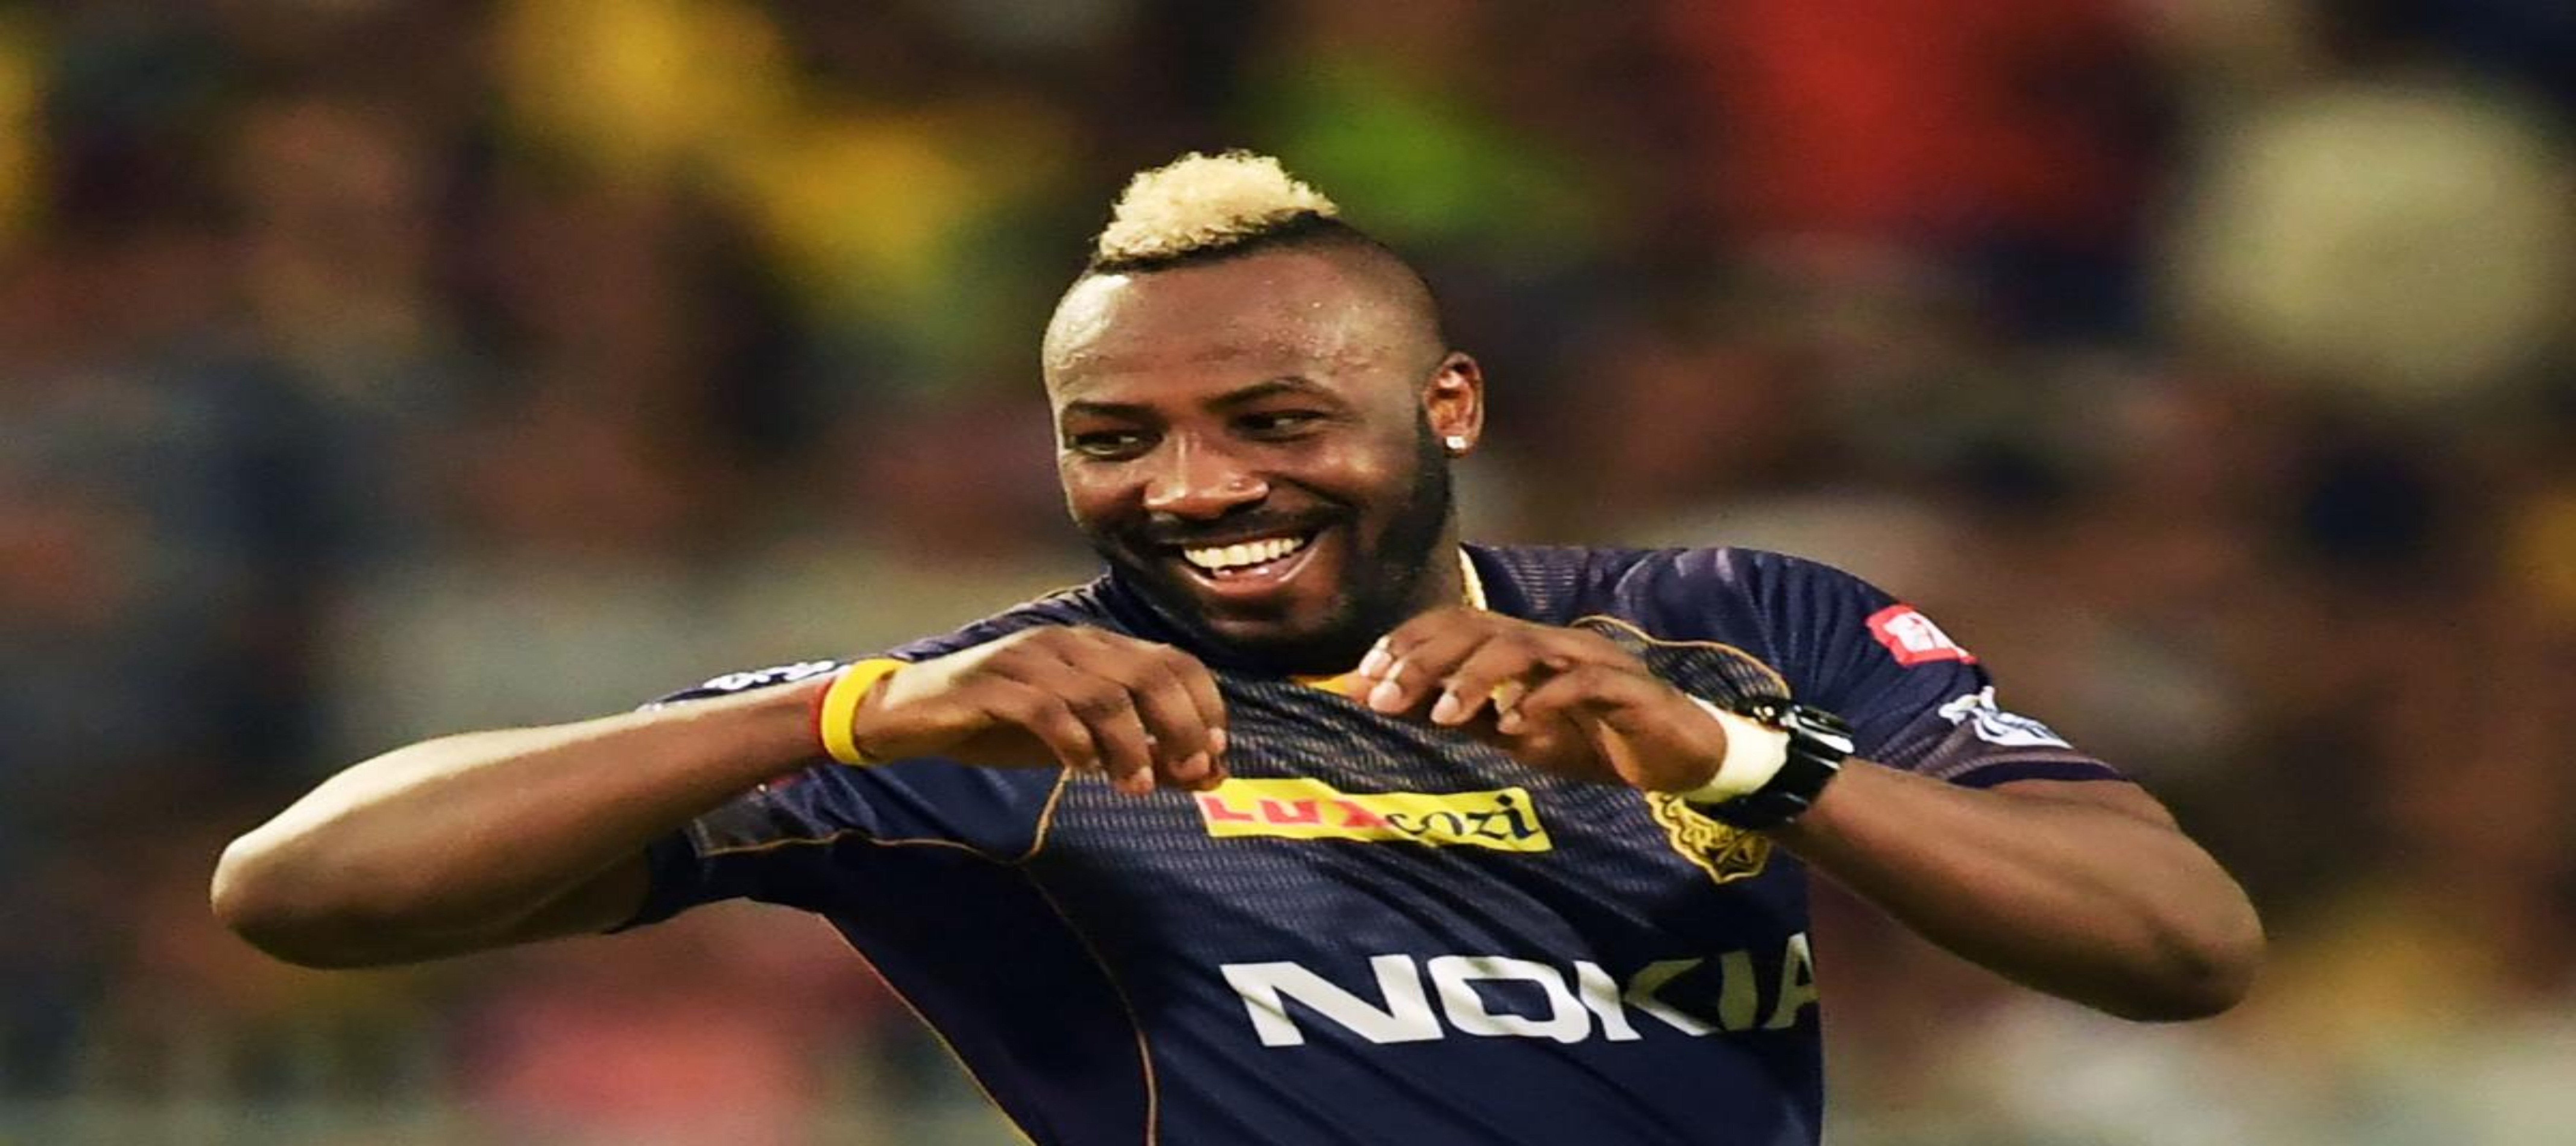 Andre Russell says his IPL retirement will be in KKR jersey